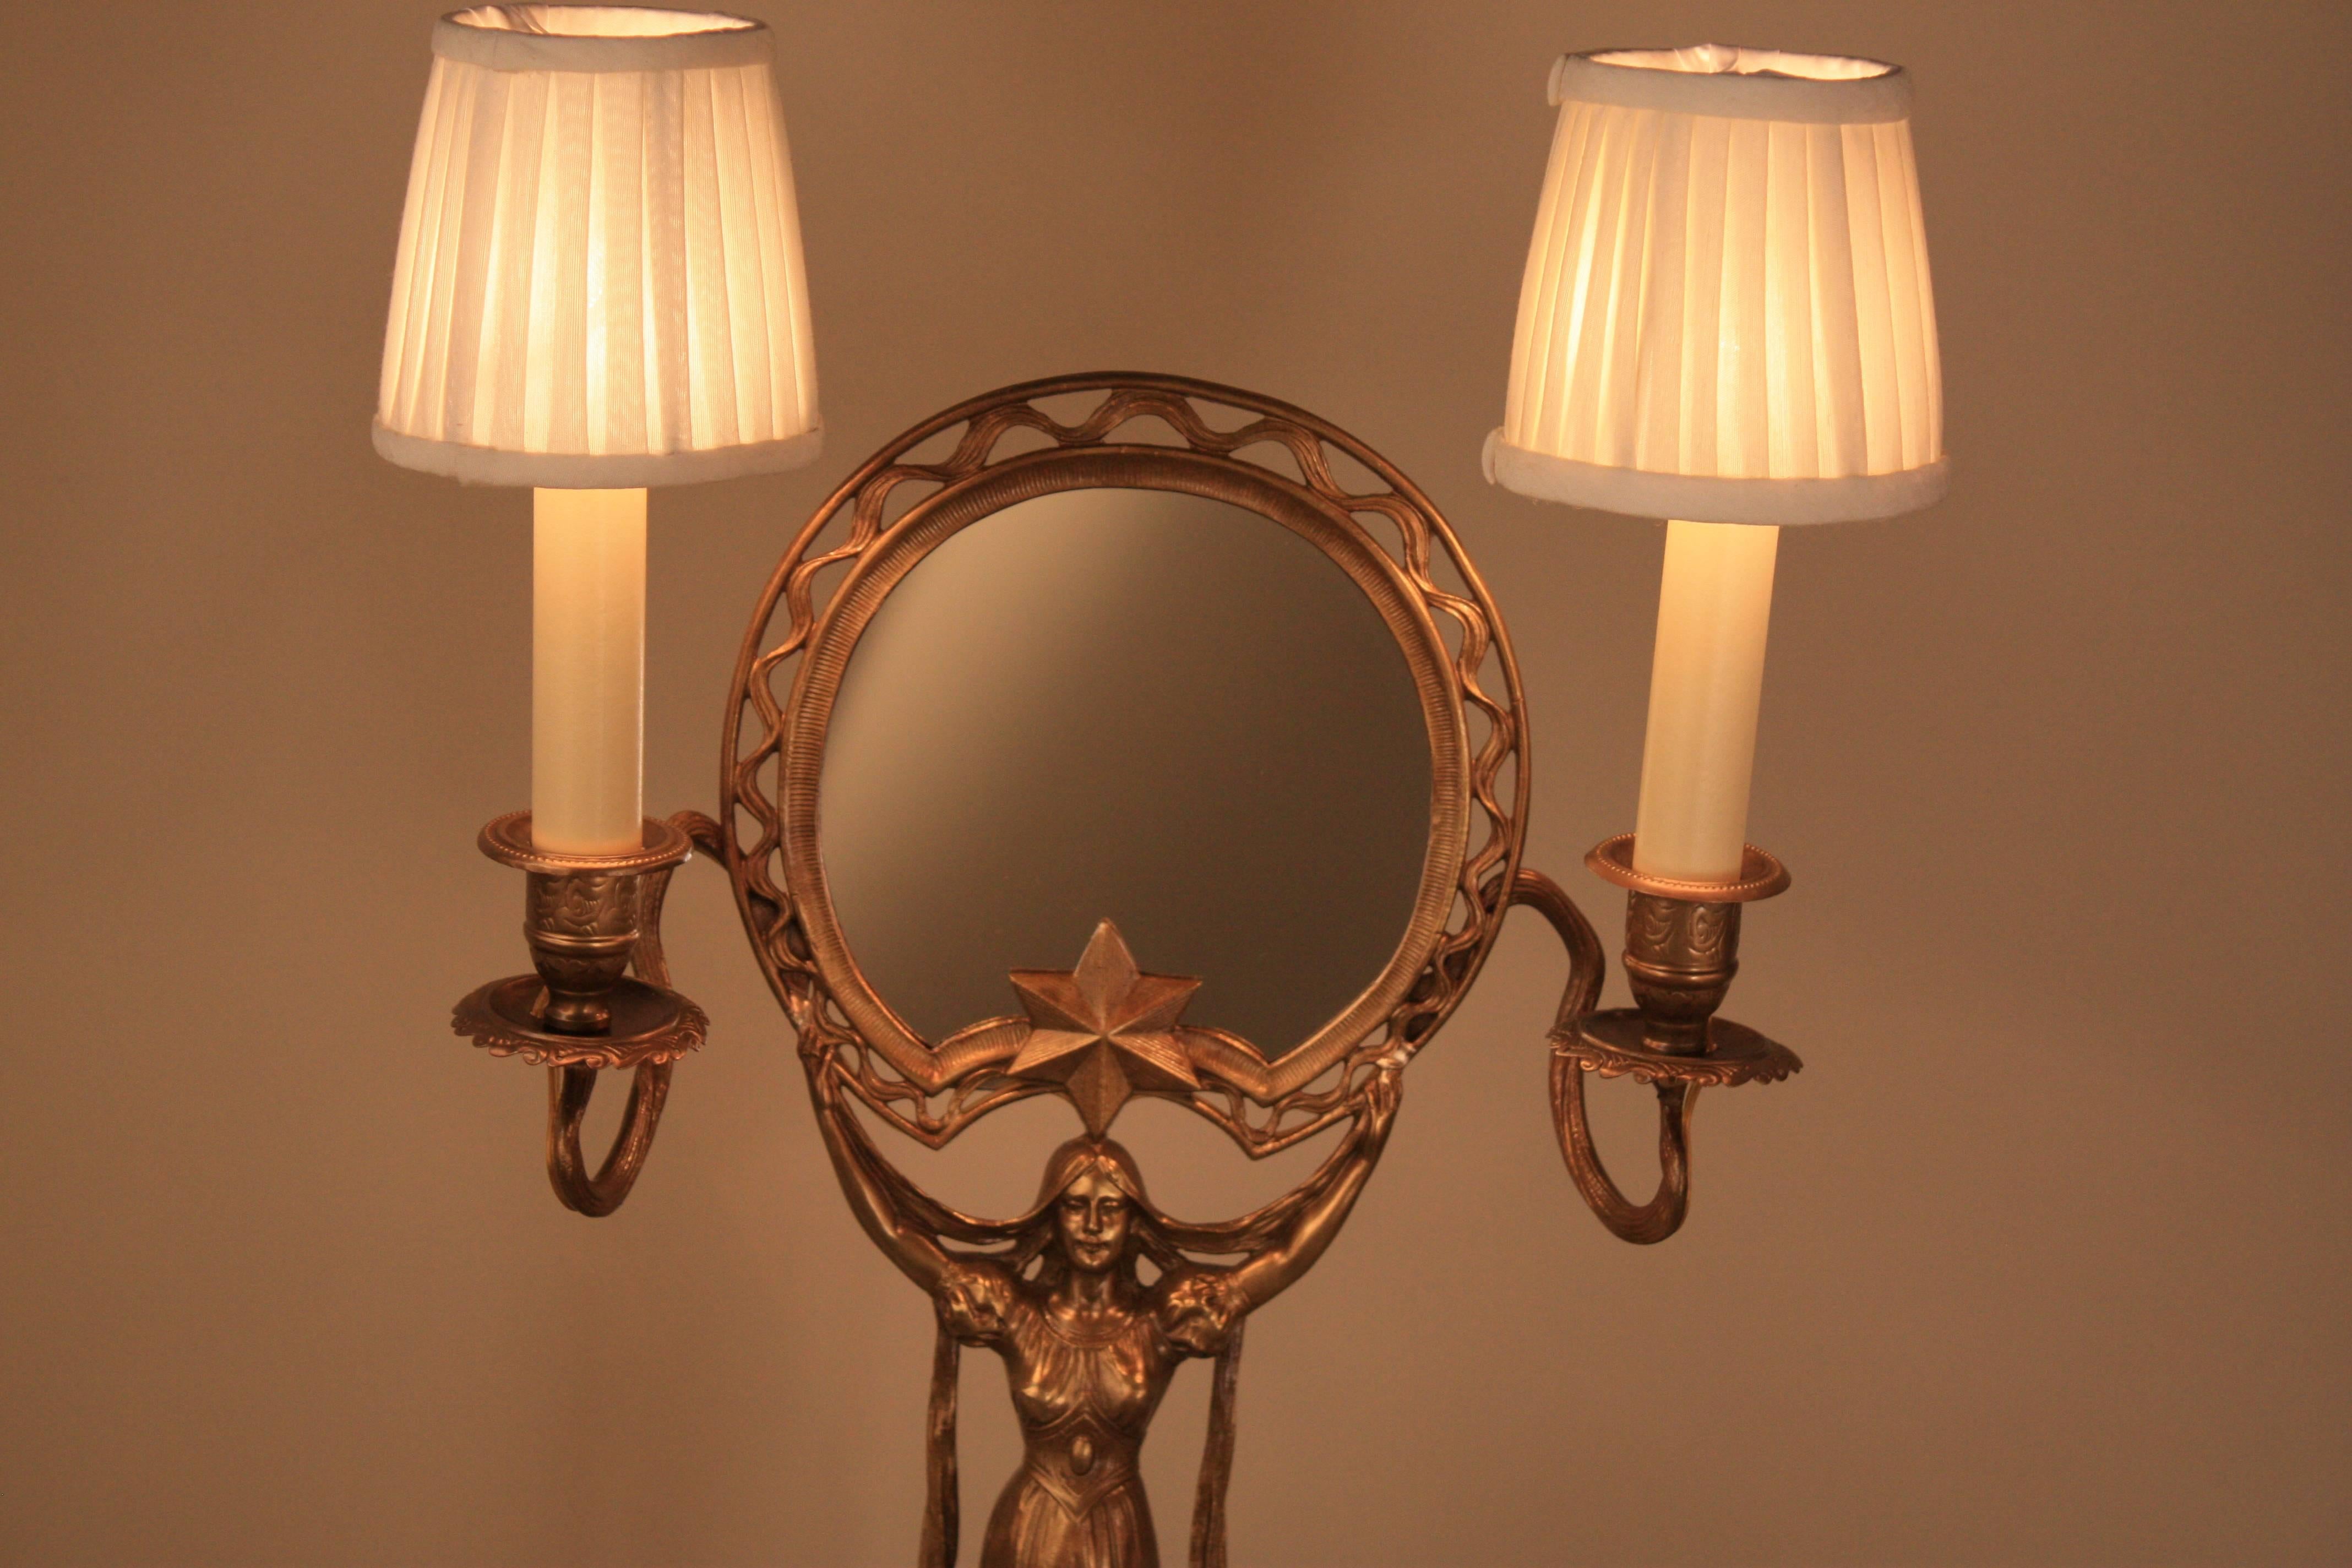 An Art Nouveau mirror in organic design, woman holding the mirror with two electrified candleholders.